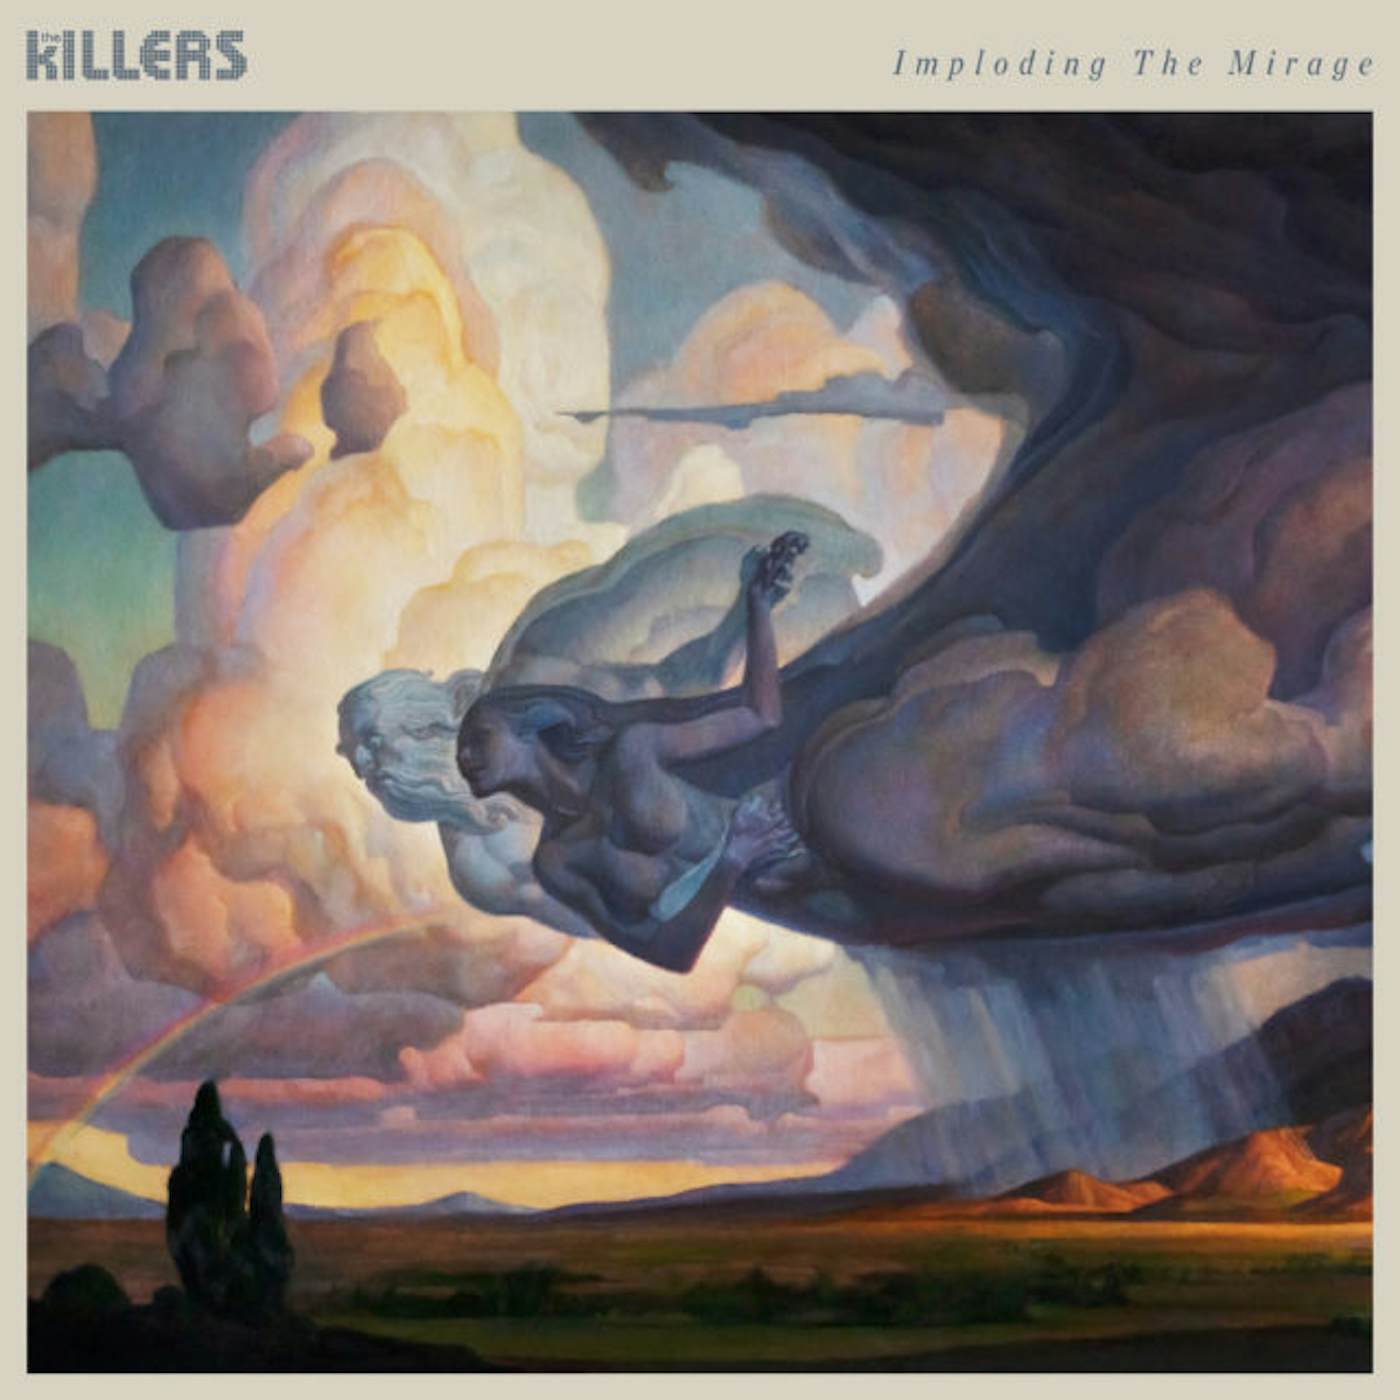 The Killers Imploding The Mirage Vinyl Record